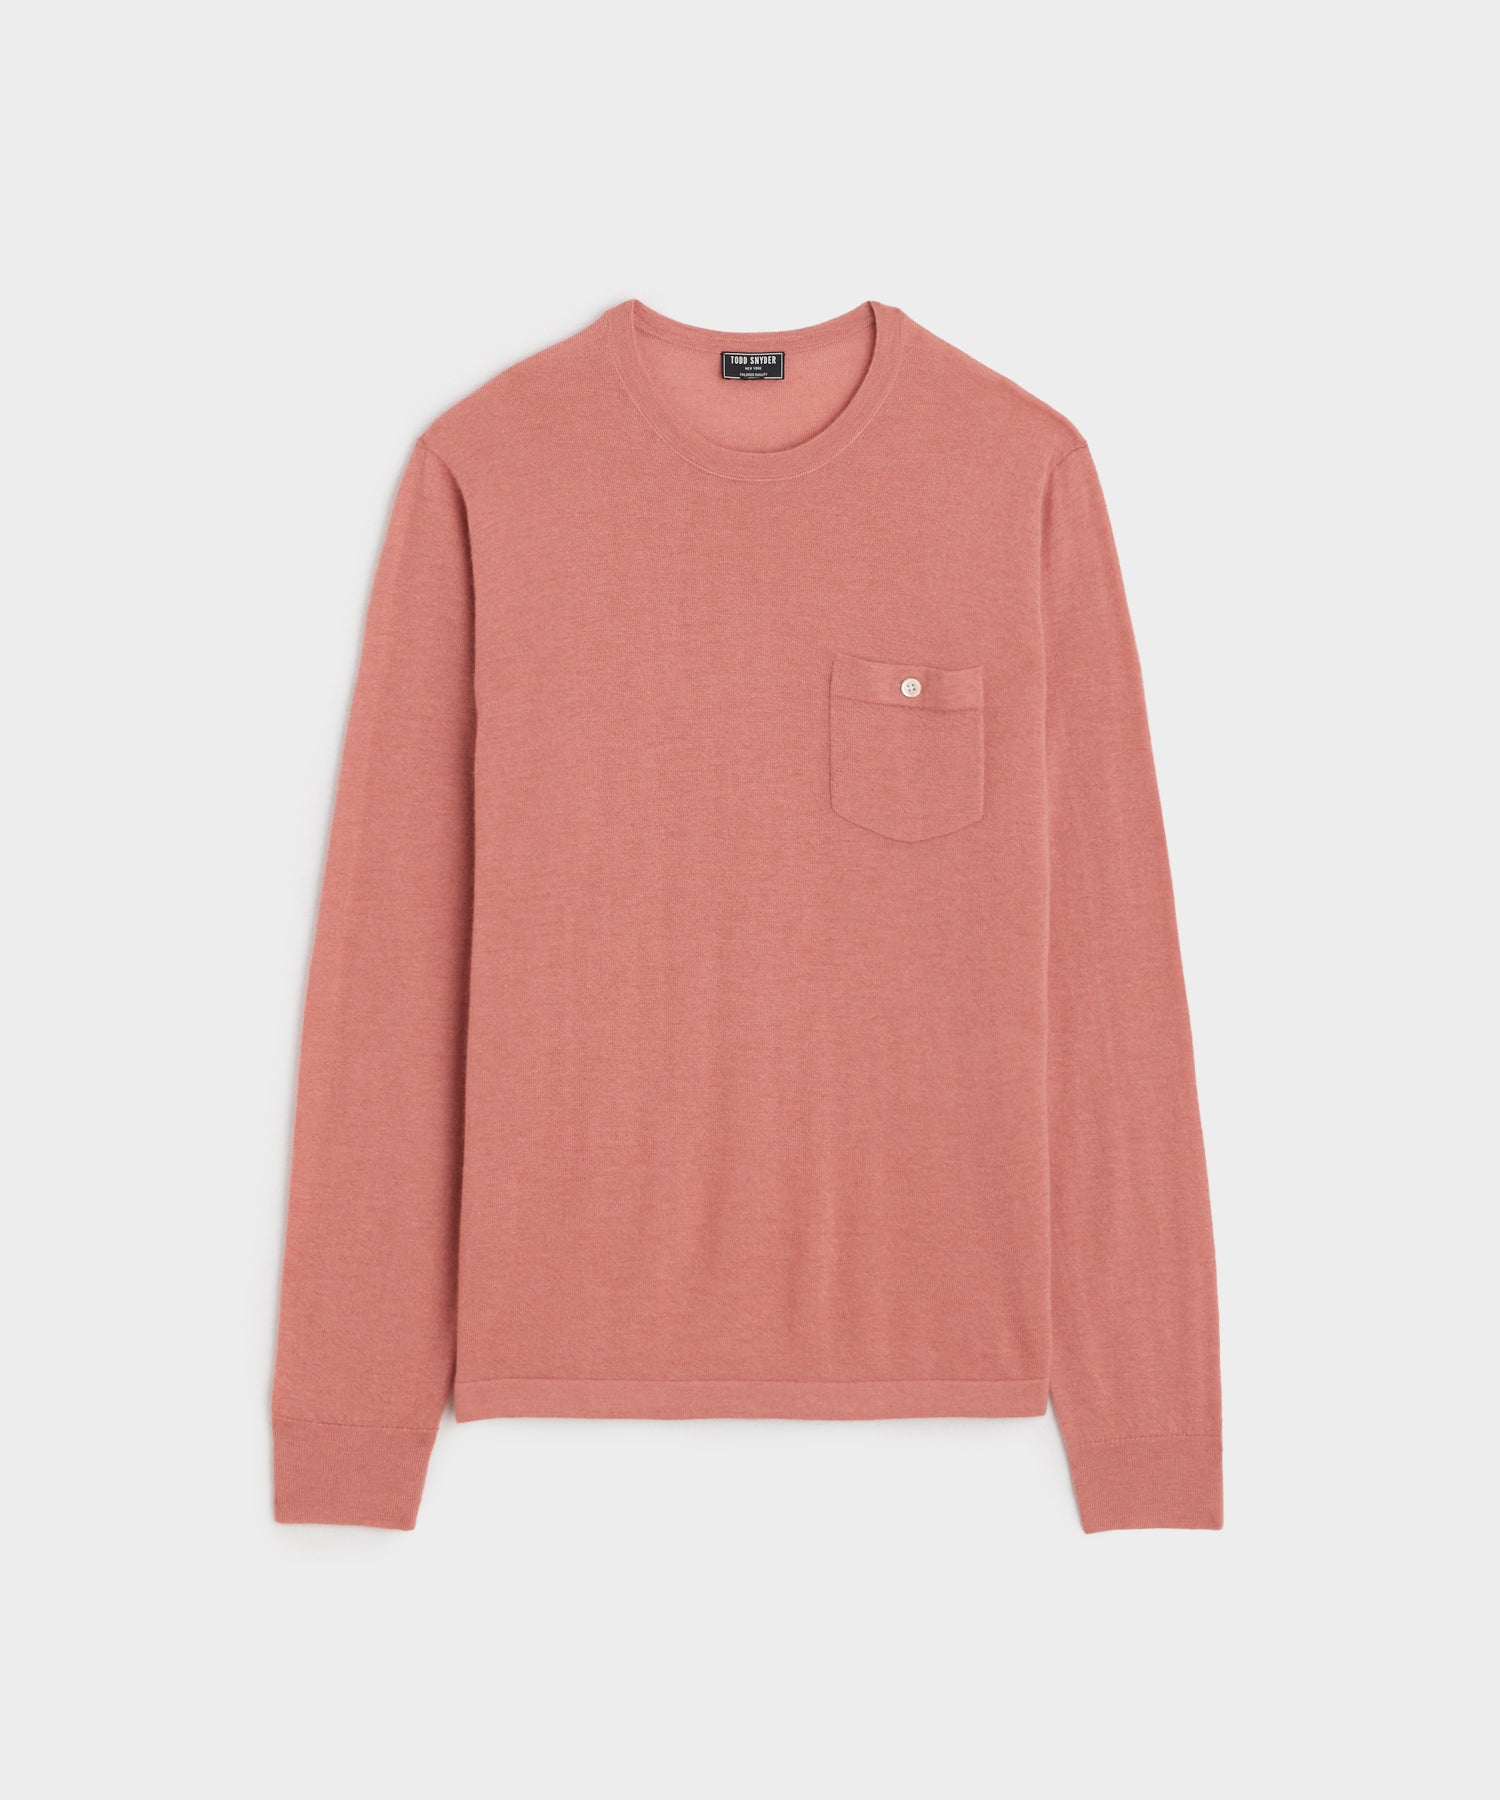 Cashmere Pocket Tee in Salmon